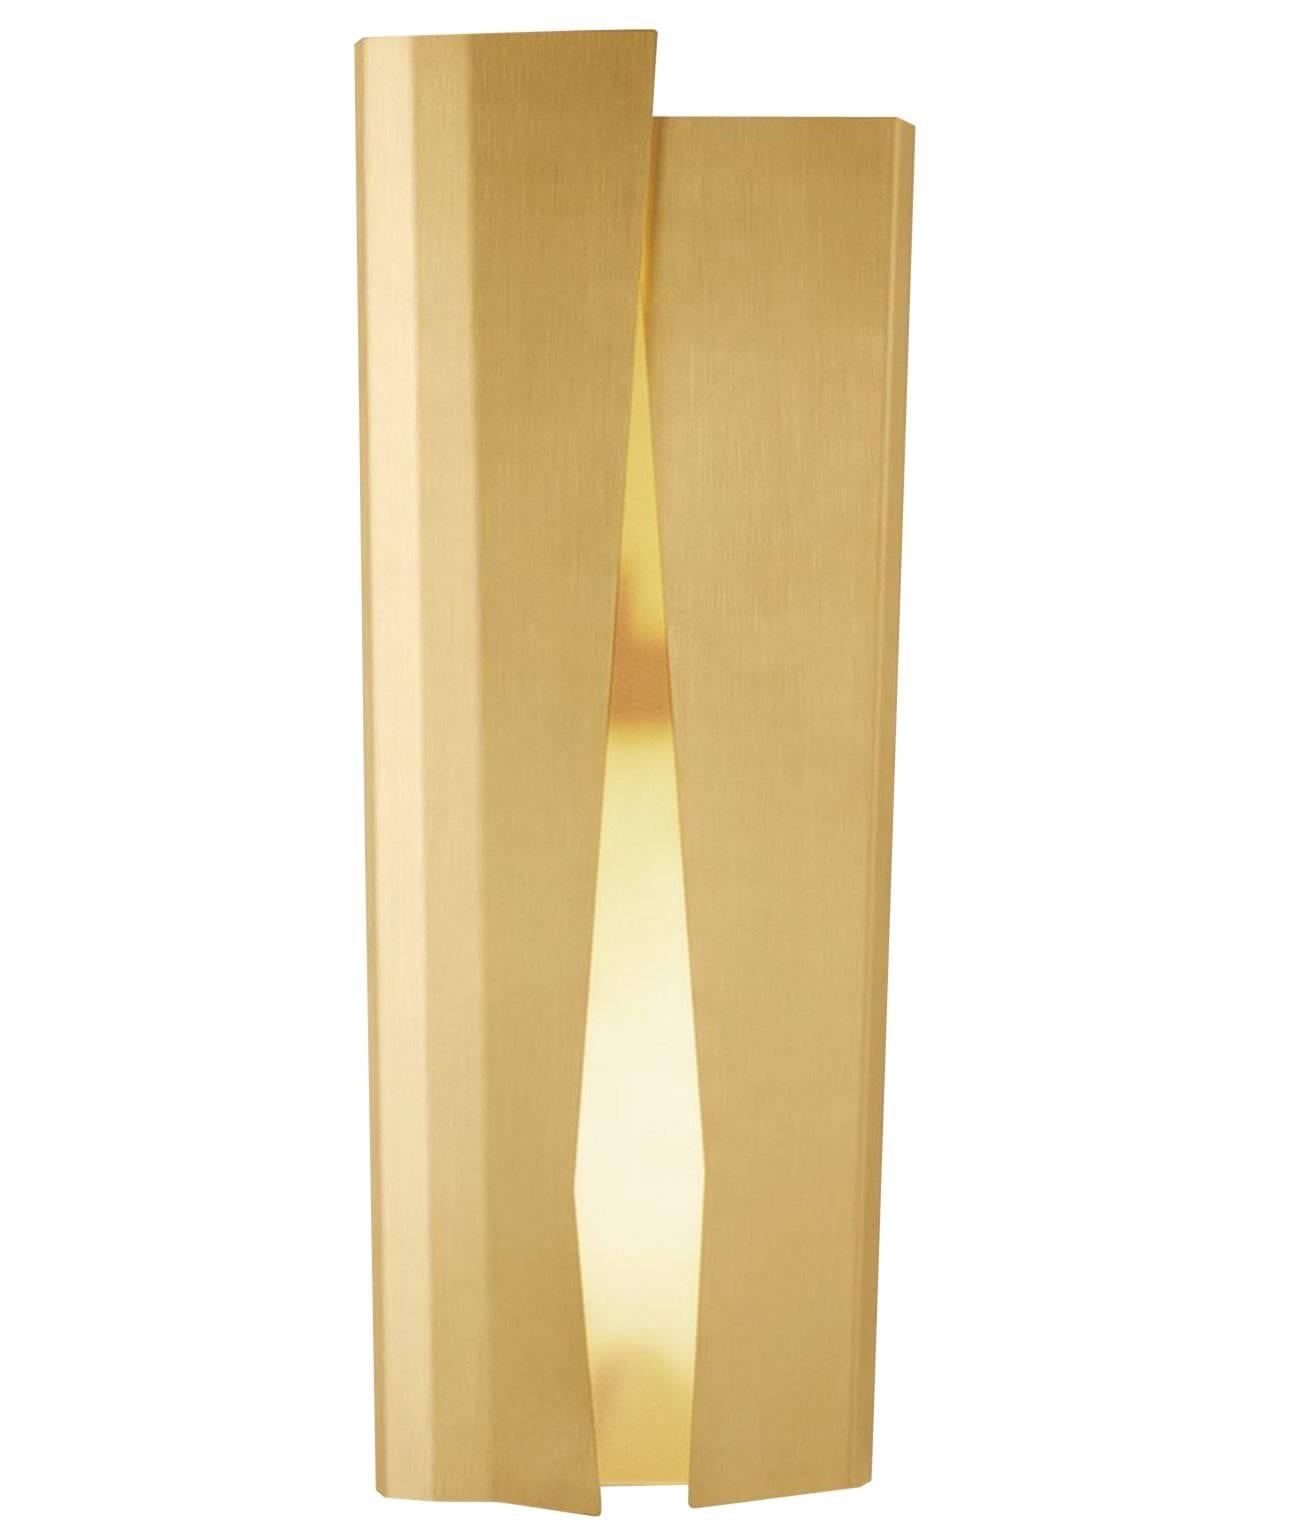 Gallotti and Radice Ori LED Wall Sconce in Polished and Brushed Brass Finish For Sale